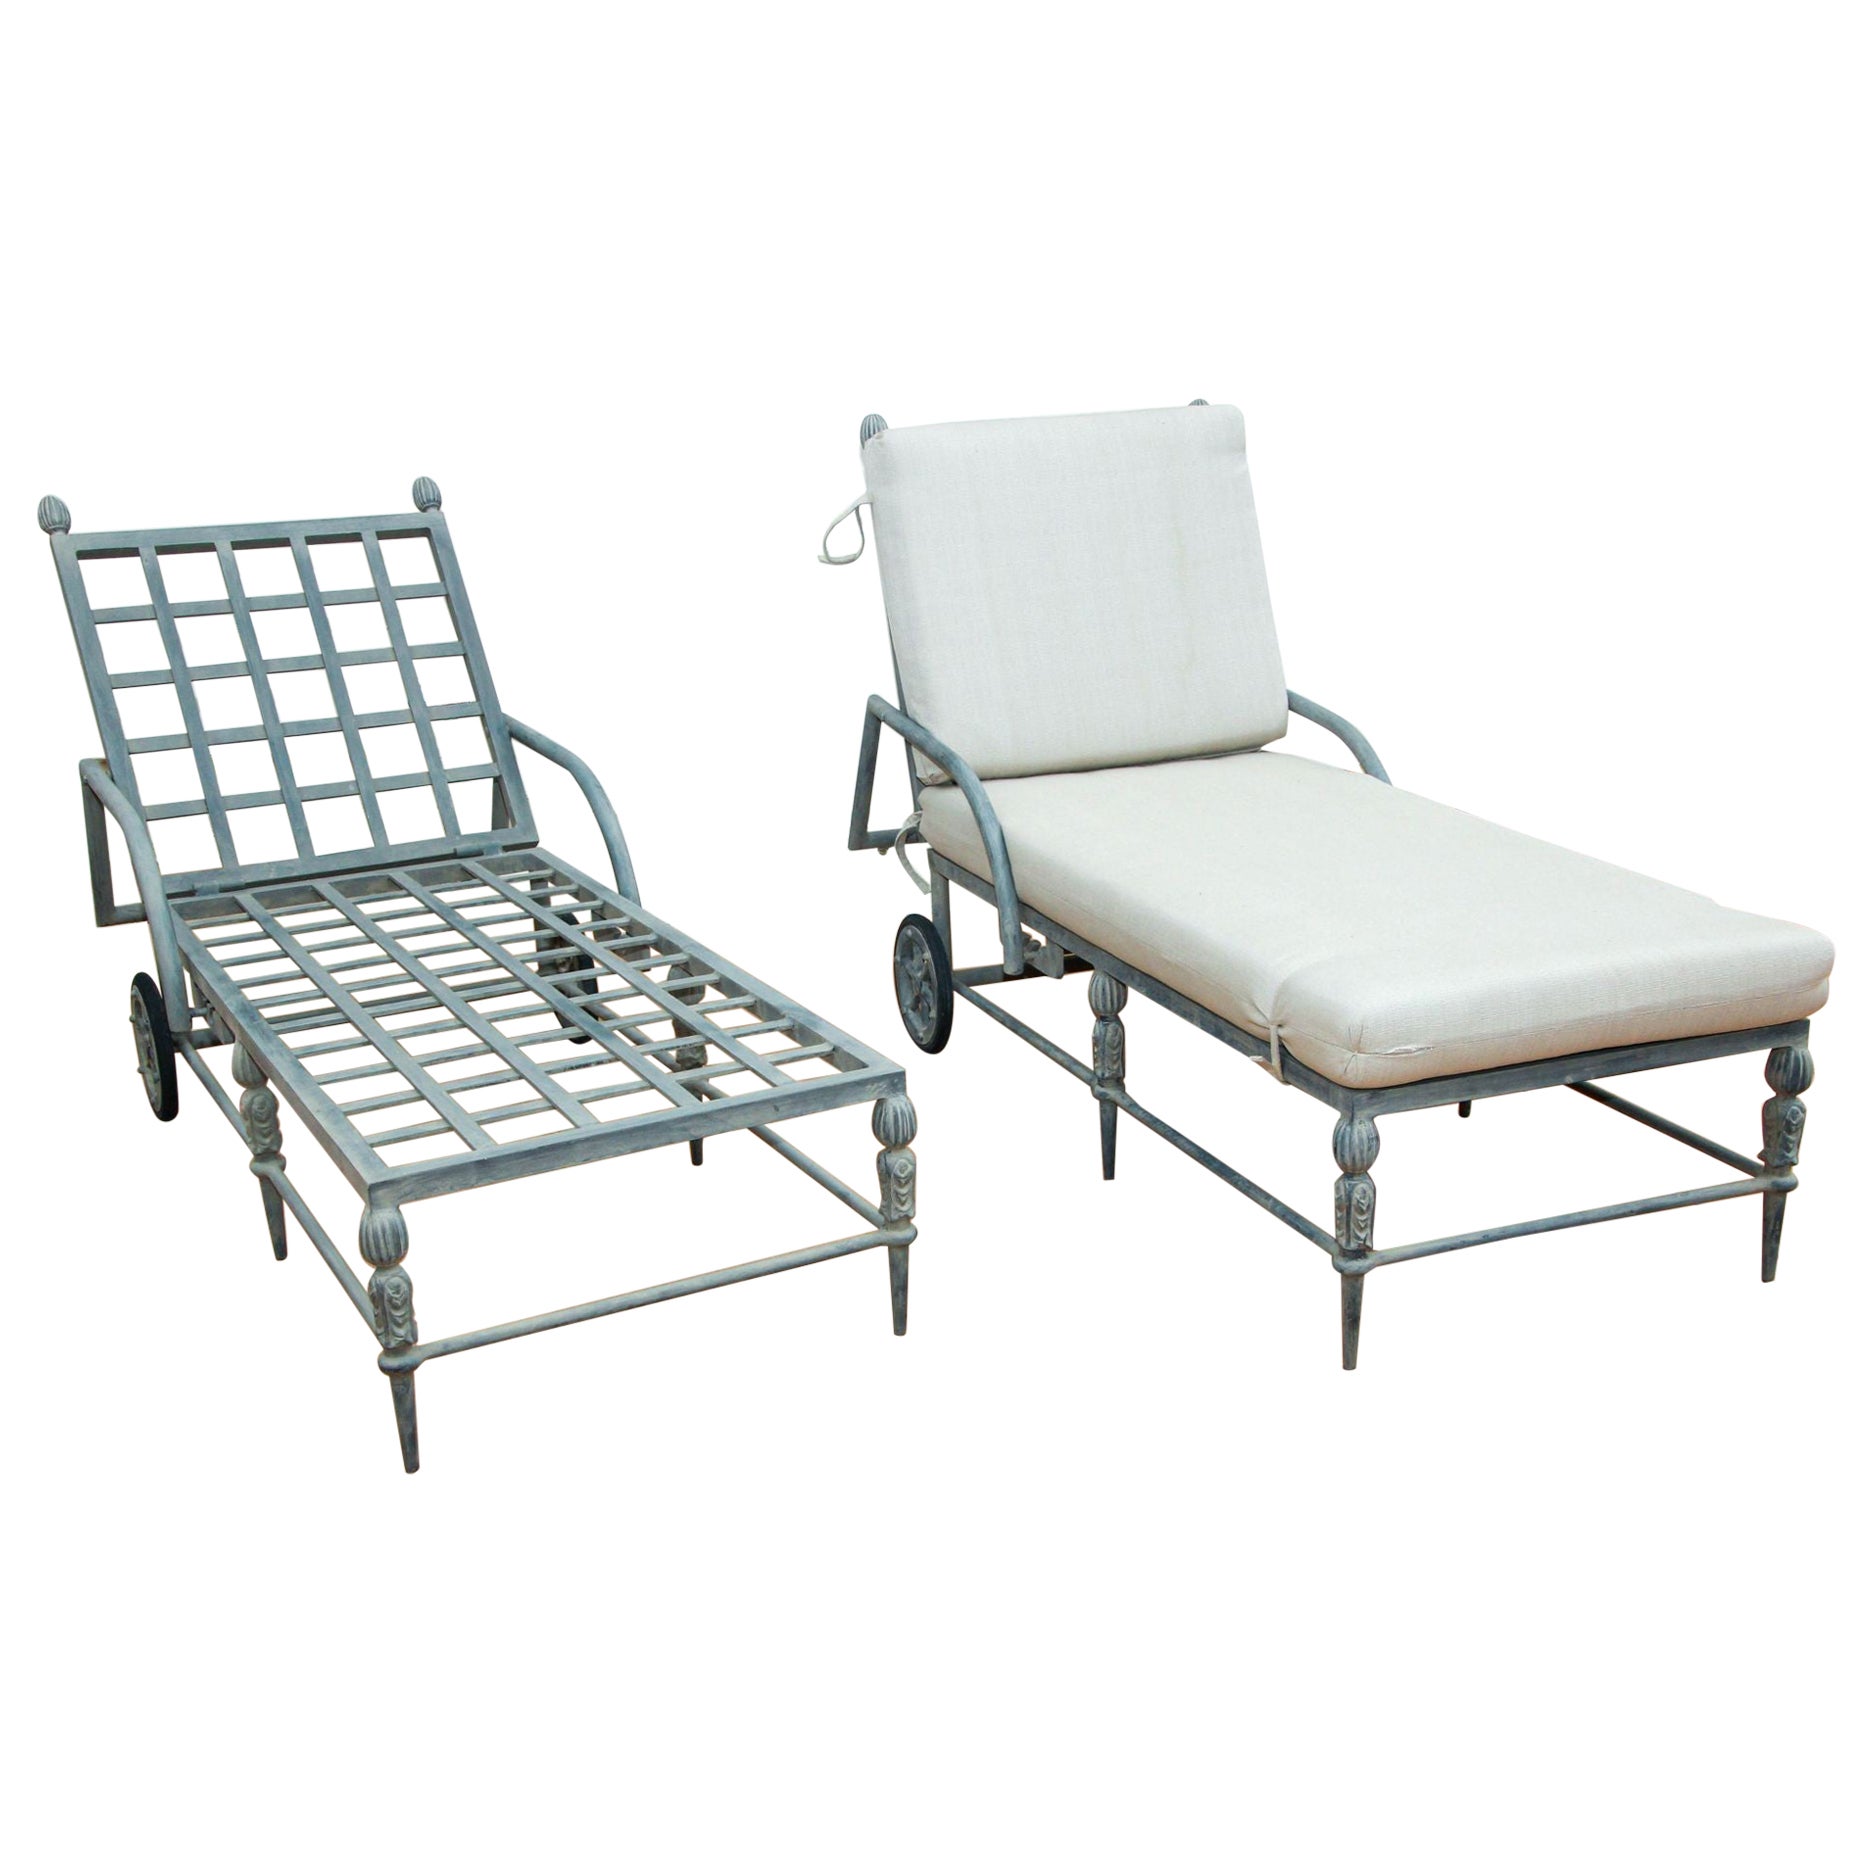 Michael Taylor "Montecito" Outdoor Garden Chaise Lounge set of Two Bronze Patina For Sale